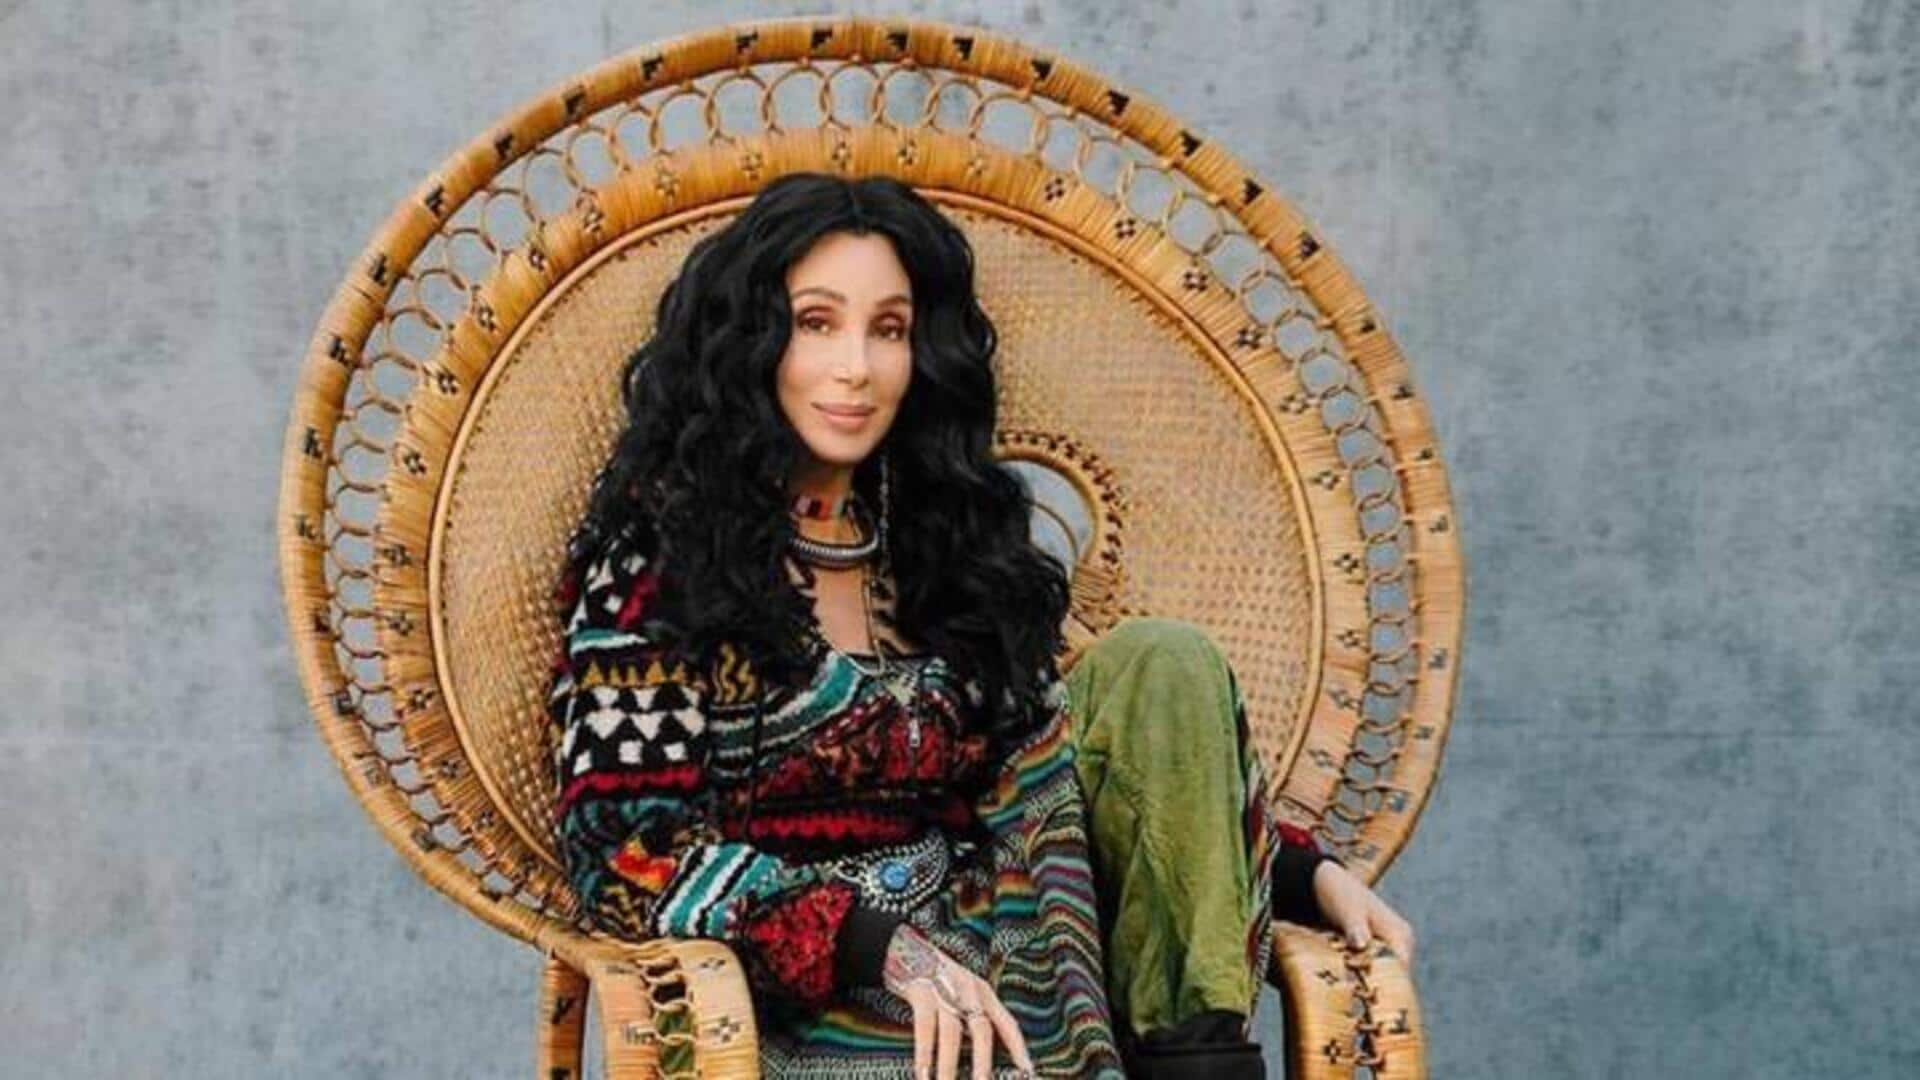 Months after kidnapping allegations, Cher files for son Elijah's conservatorship